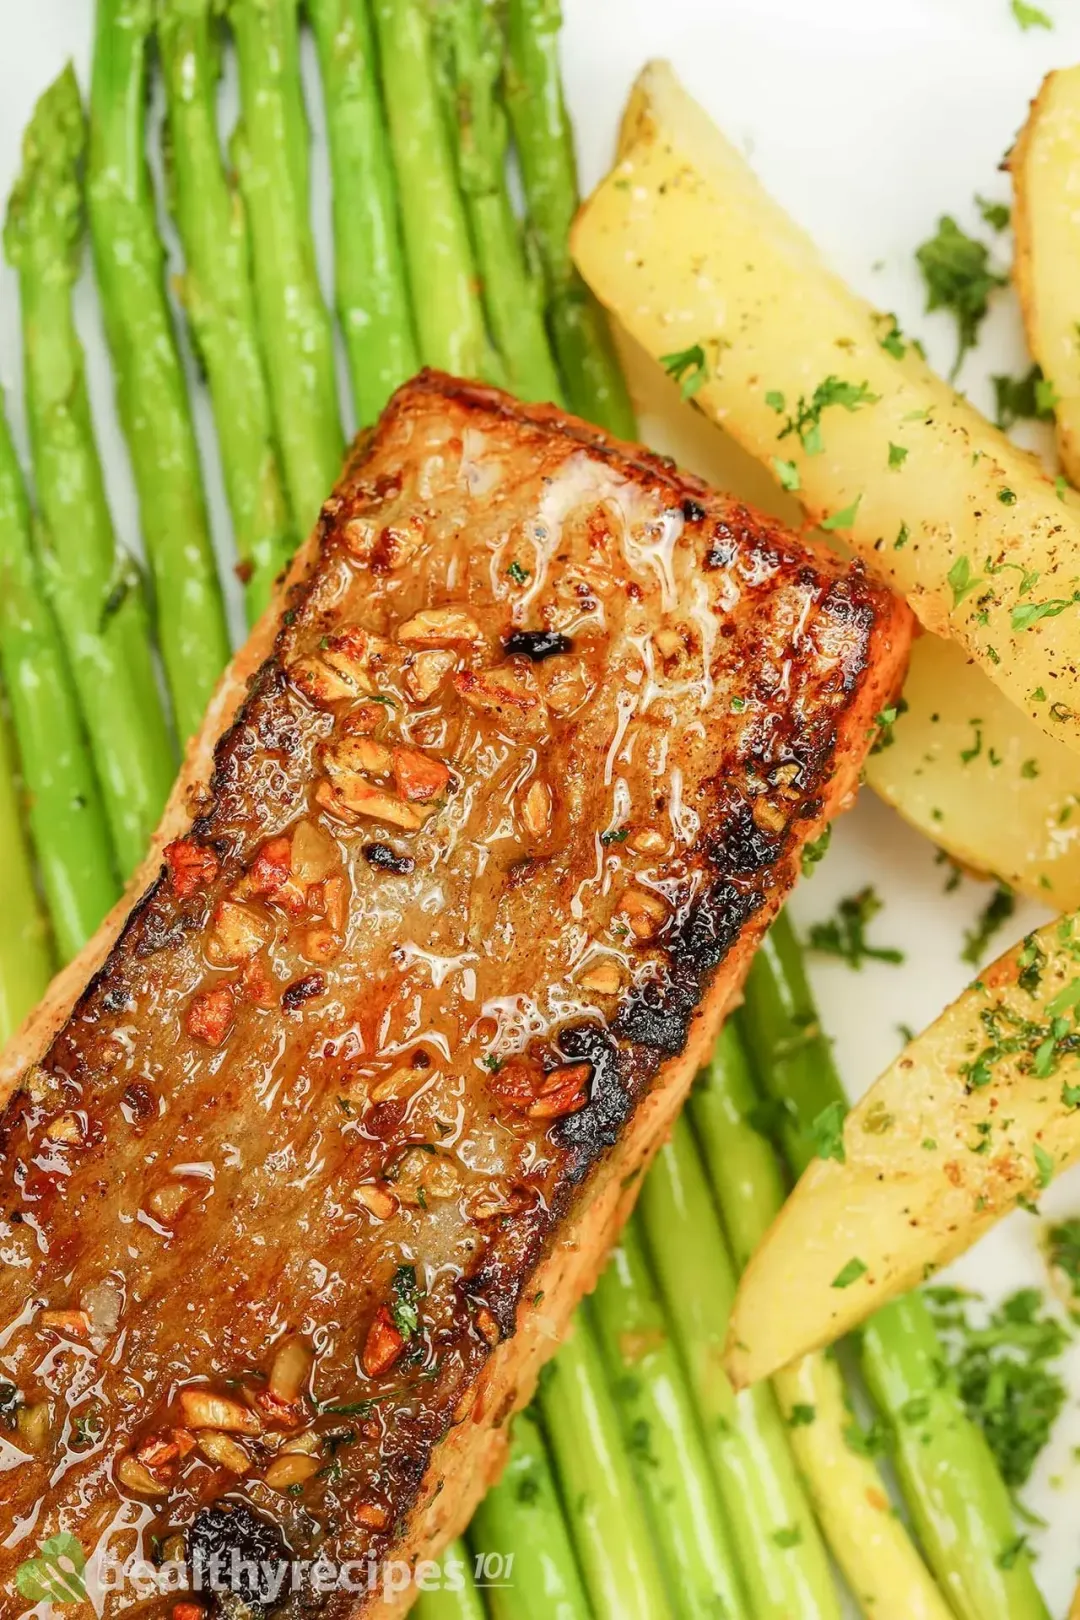 a plate containing a pan-seared salmon fillet, potato wedges covered in parsley, asparagus stalks